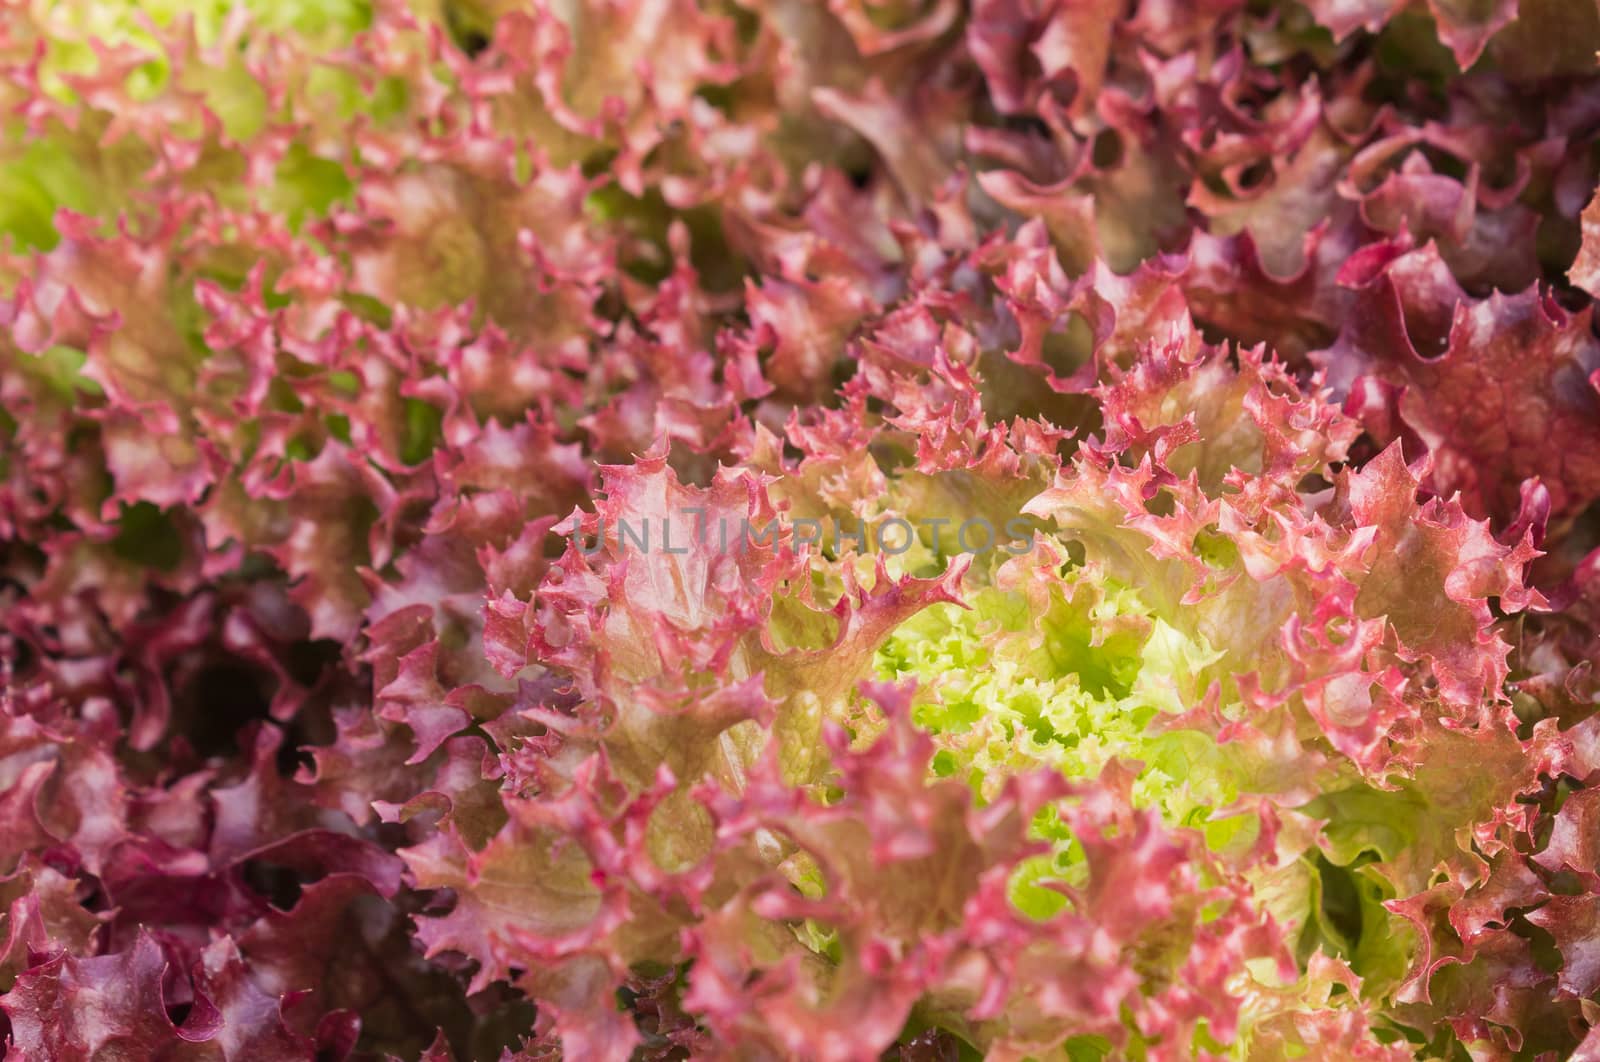 Red Leaf Lettuce or Red Coral for Diet Health Close Up by steafpong